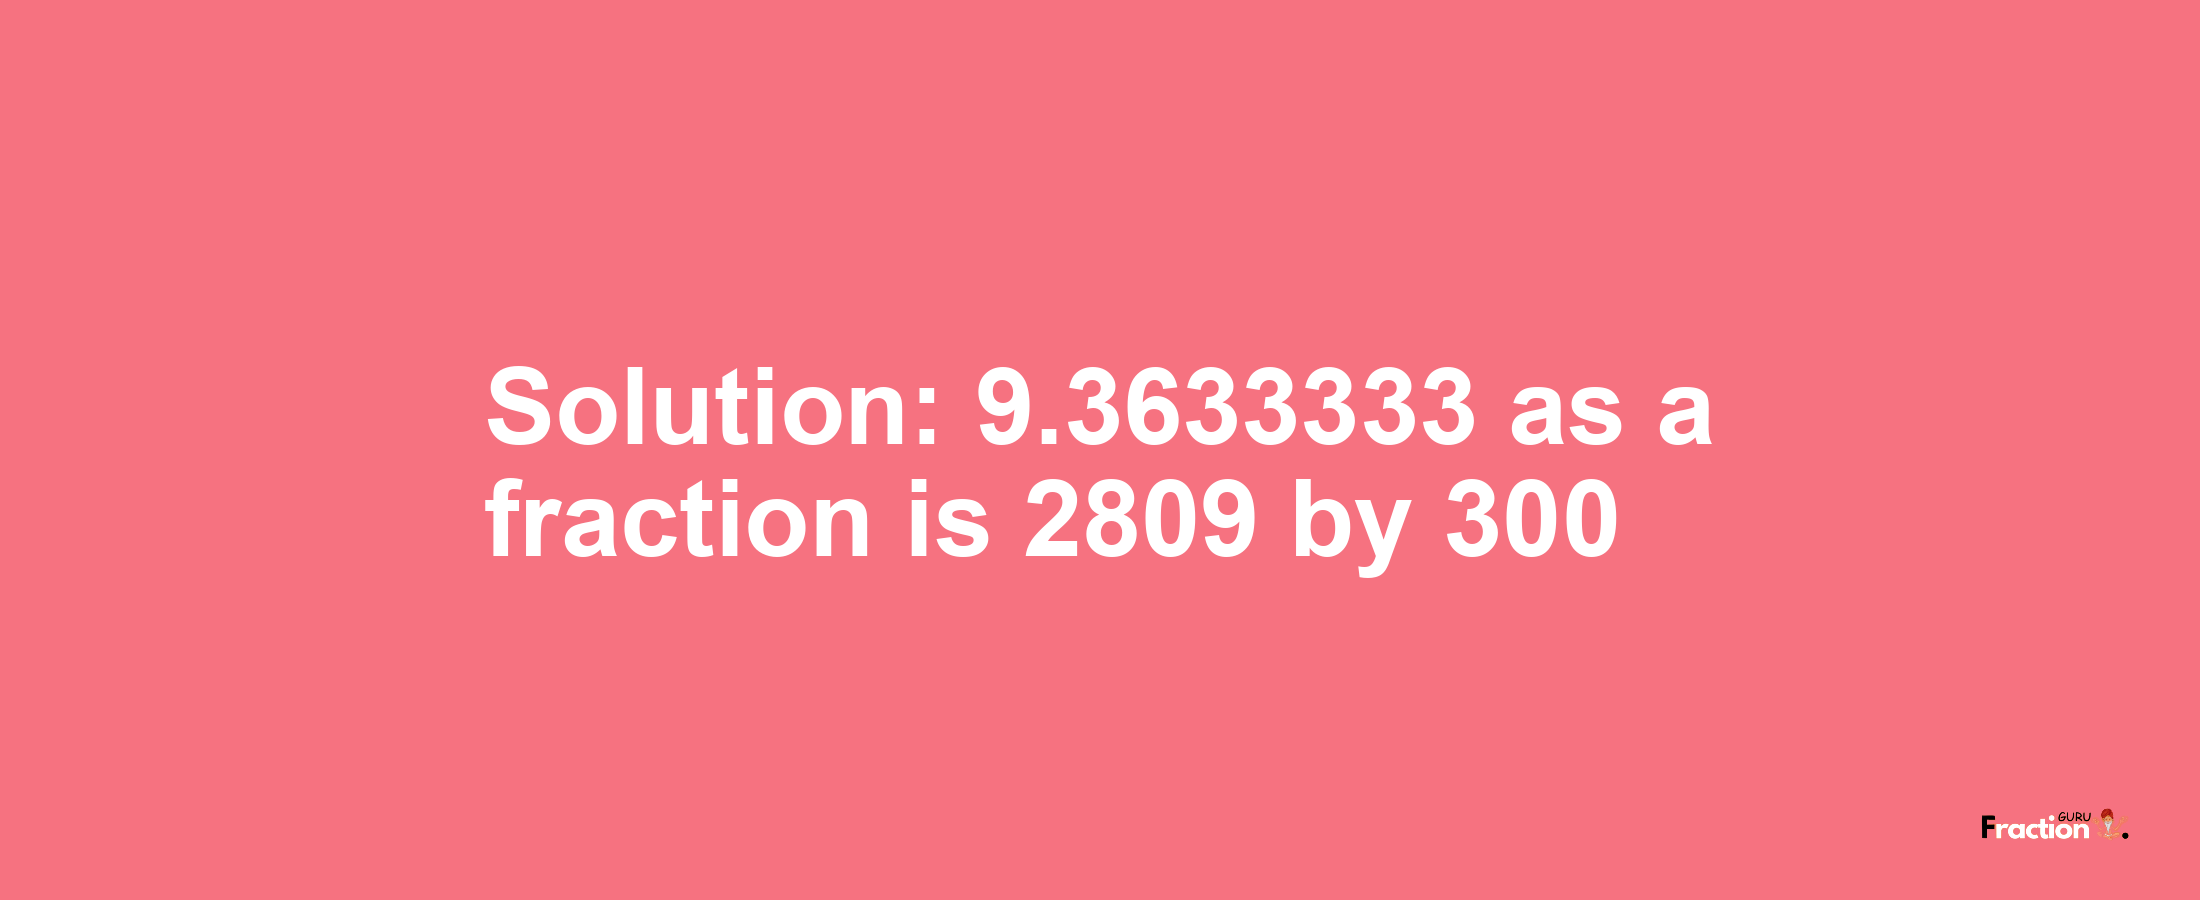 Solution:9.3633333 as a fraction is 2809/300